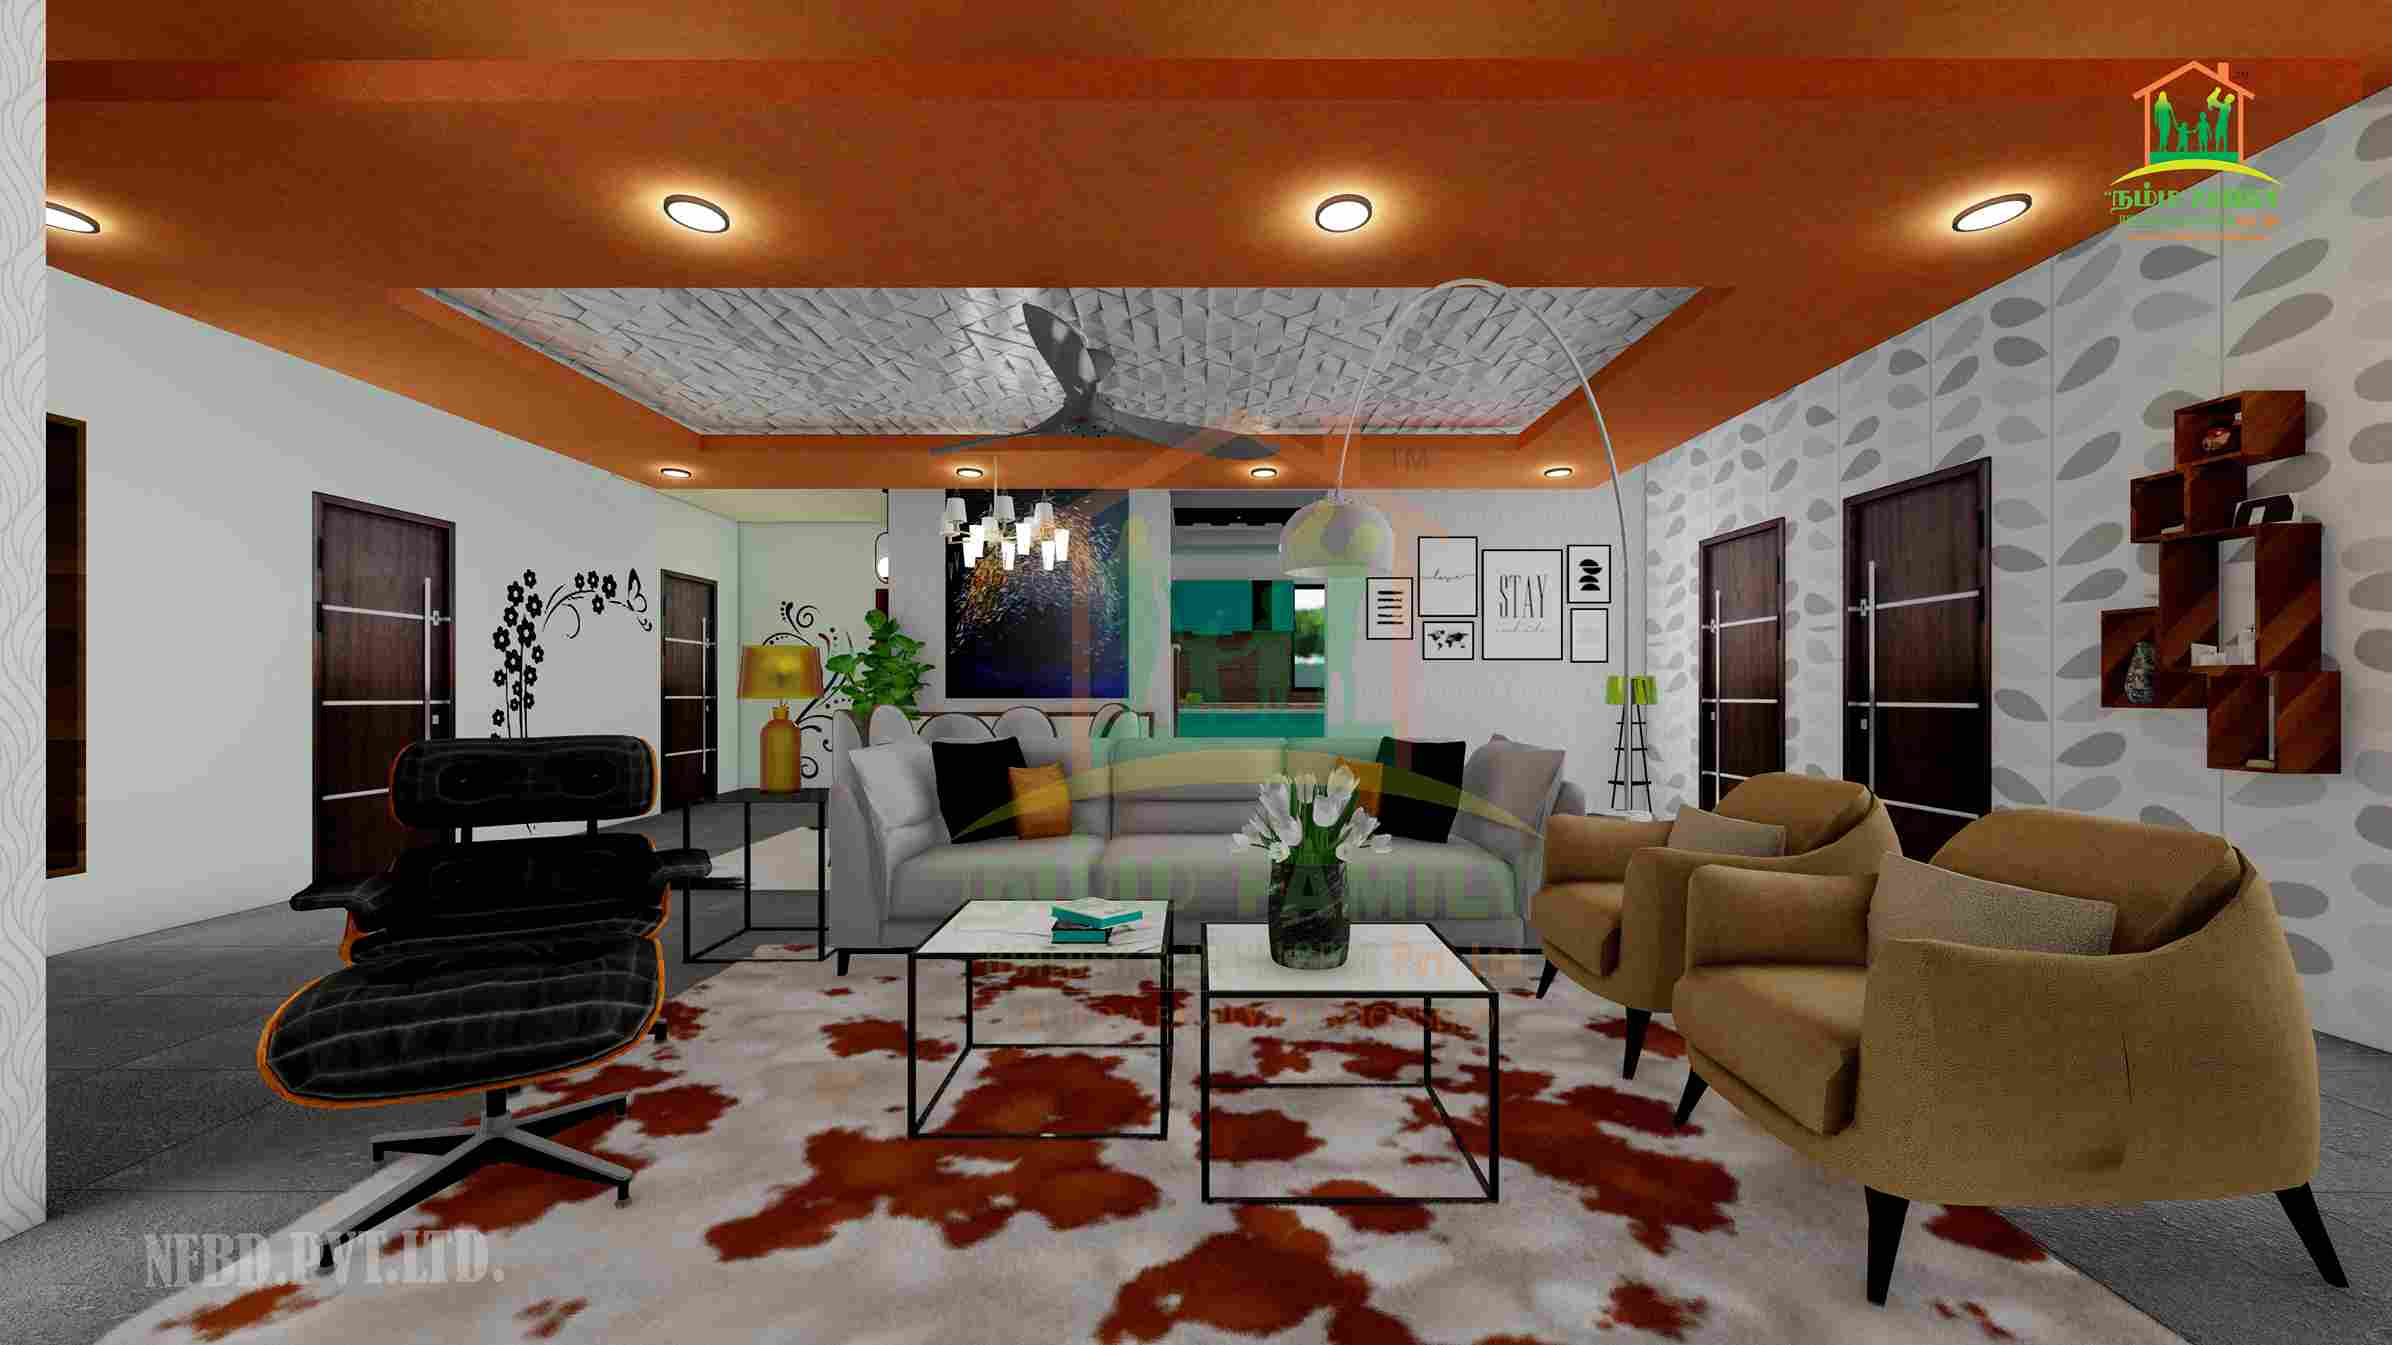 Latest Top 10 New Ceiling Design Ideas For Home With Pictures- 2023